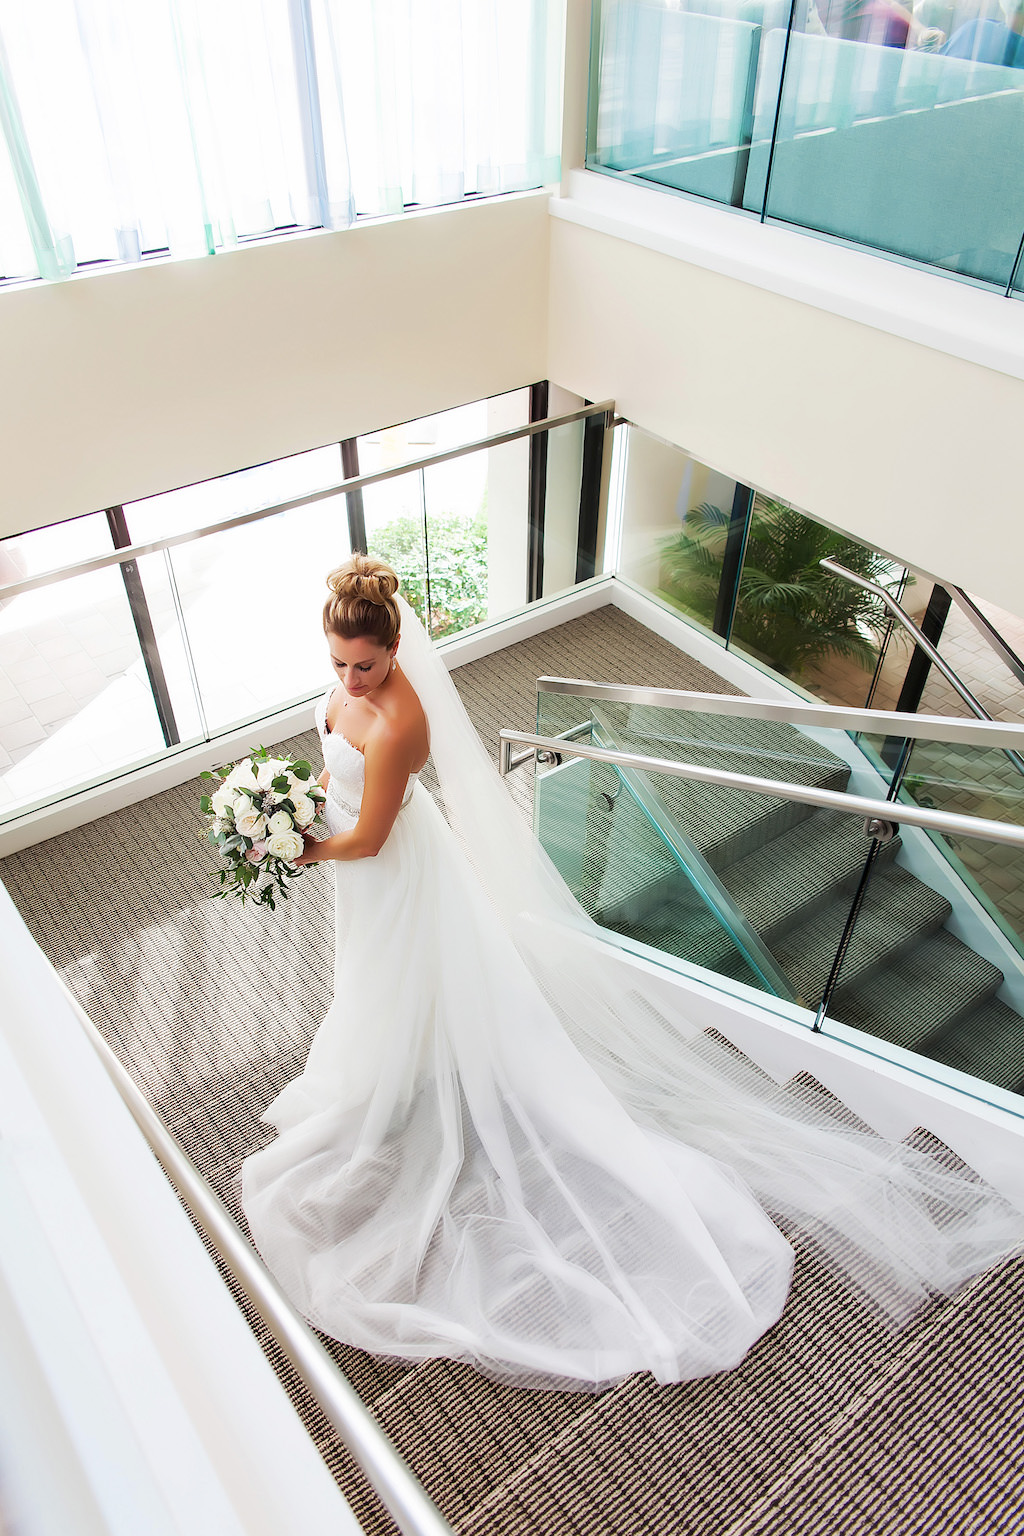 Hotel Interior Bridal Portrait in Strapless Wedding Dress with Long Veil and White and Greenery Bouquet | Tampa Bay Venue Hilton Clearwater Beach